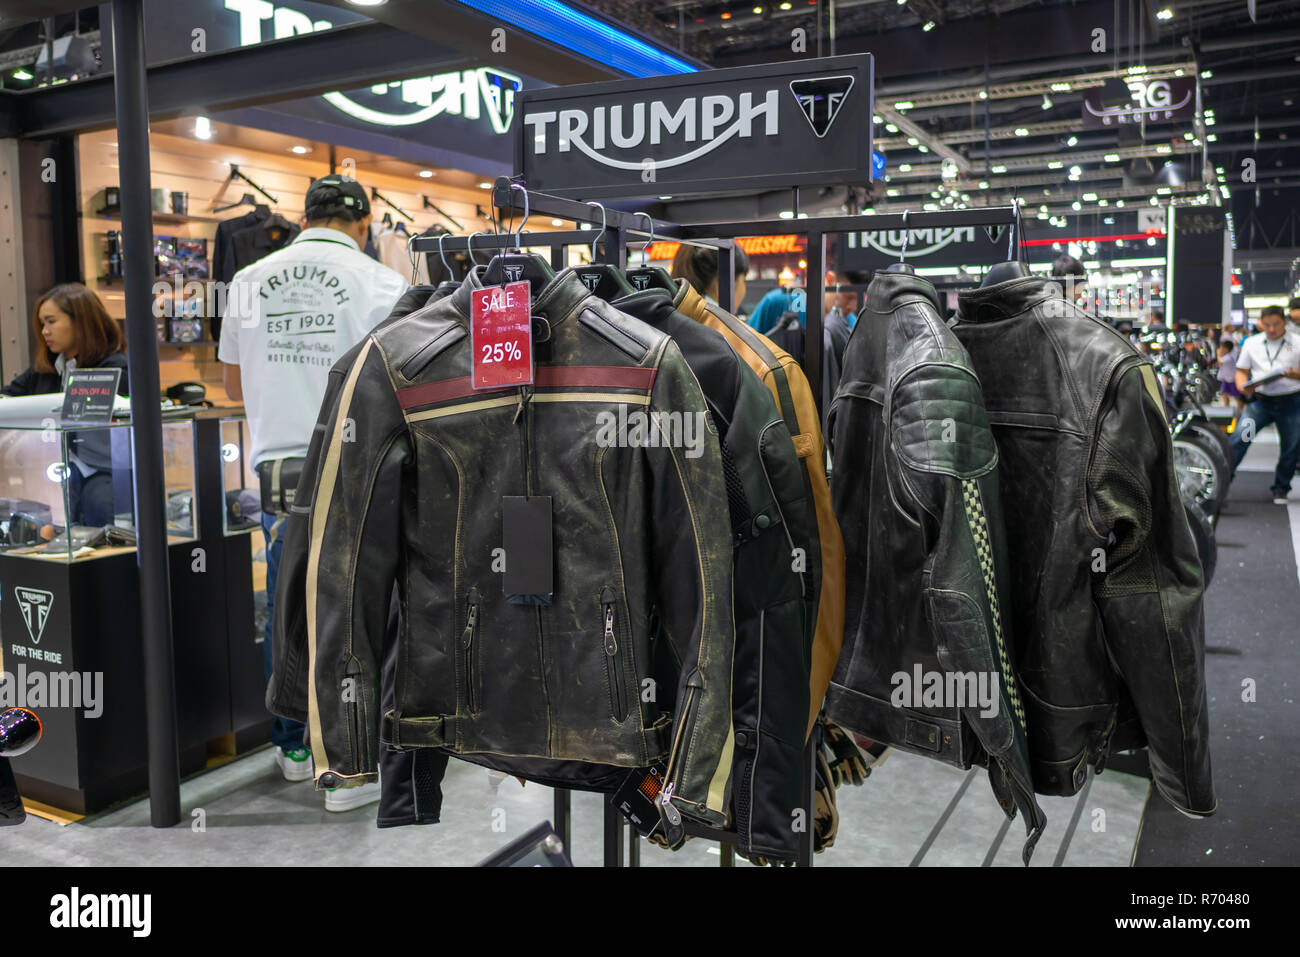 At The Triumph Showroom High Resolution Stock Photography And Images Alamy